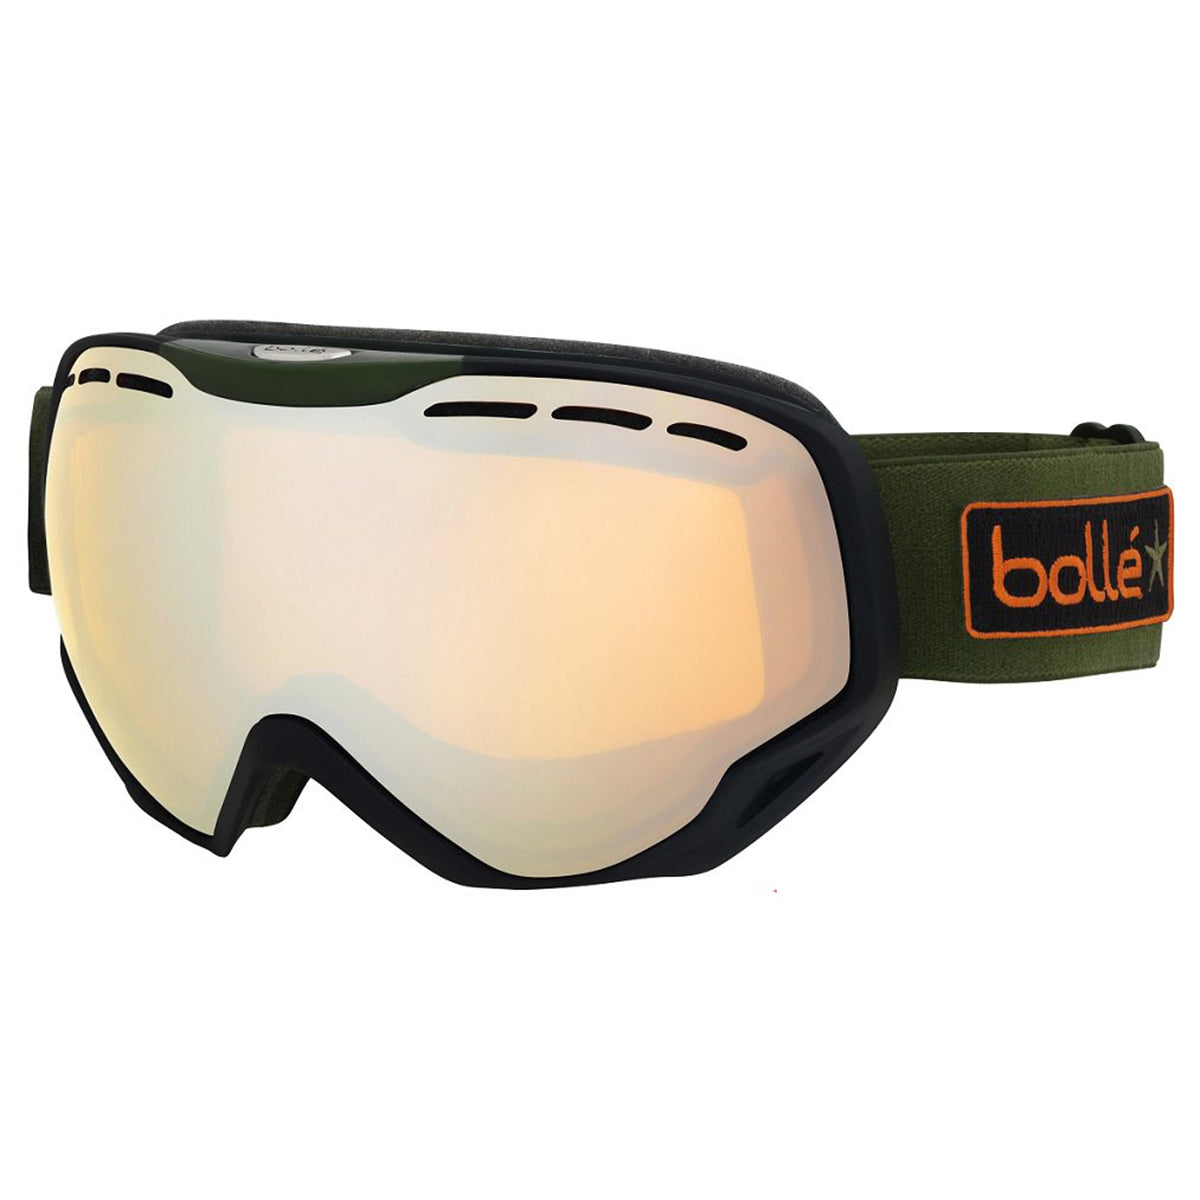 Bolle Emporer Adult Snow Goggles-21143